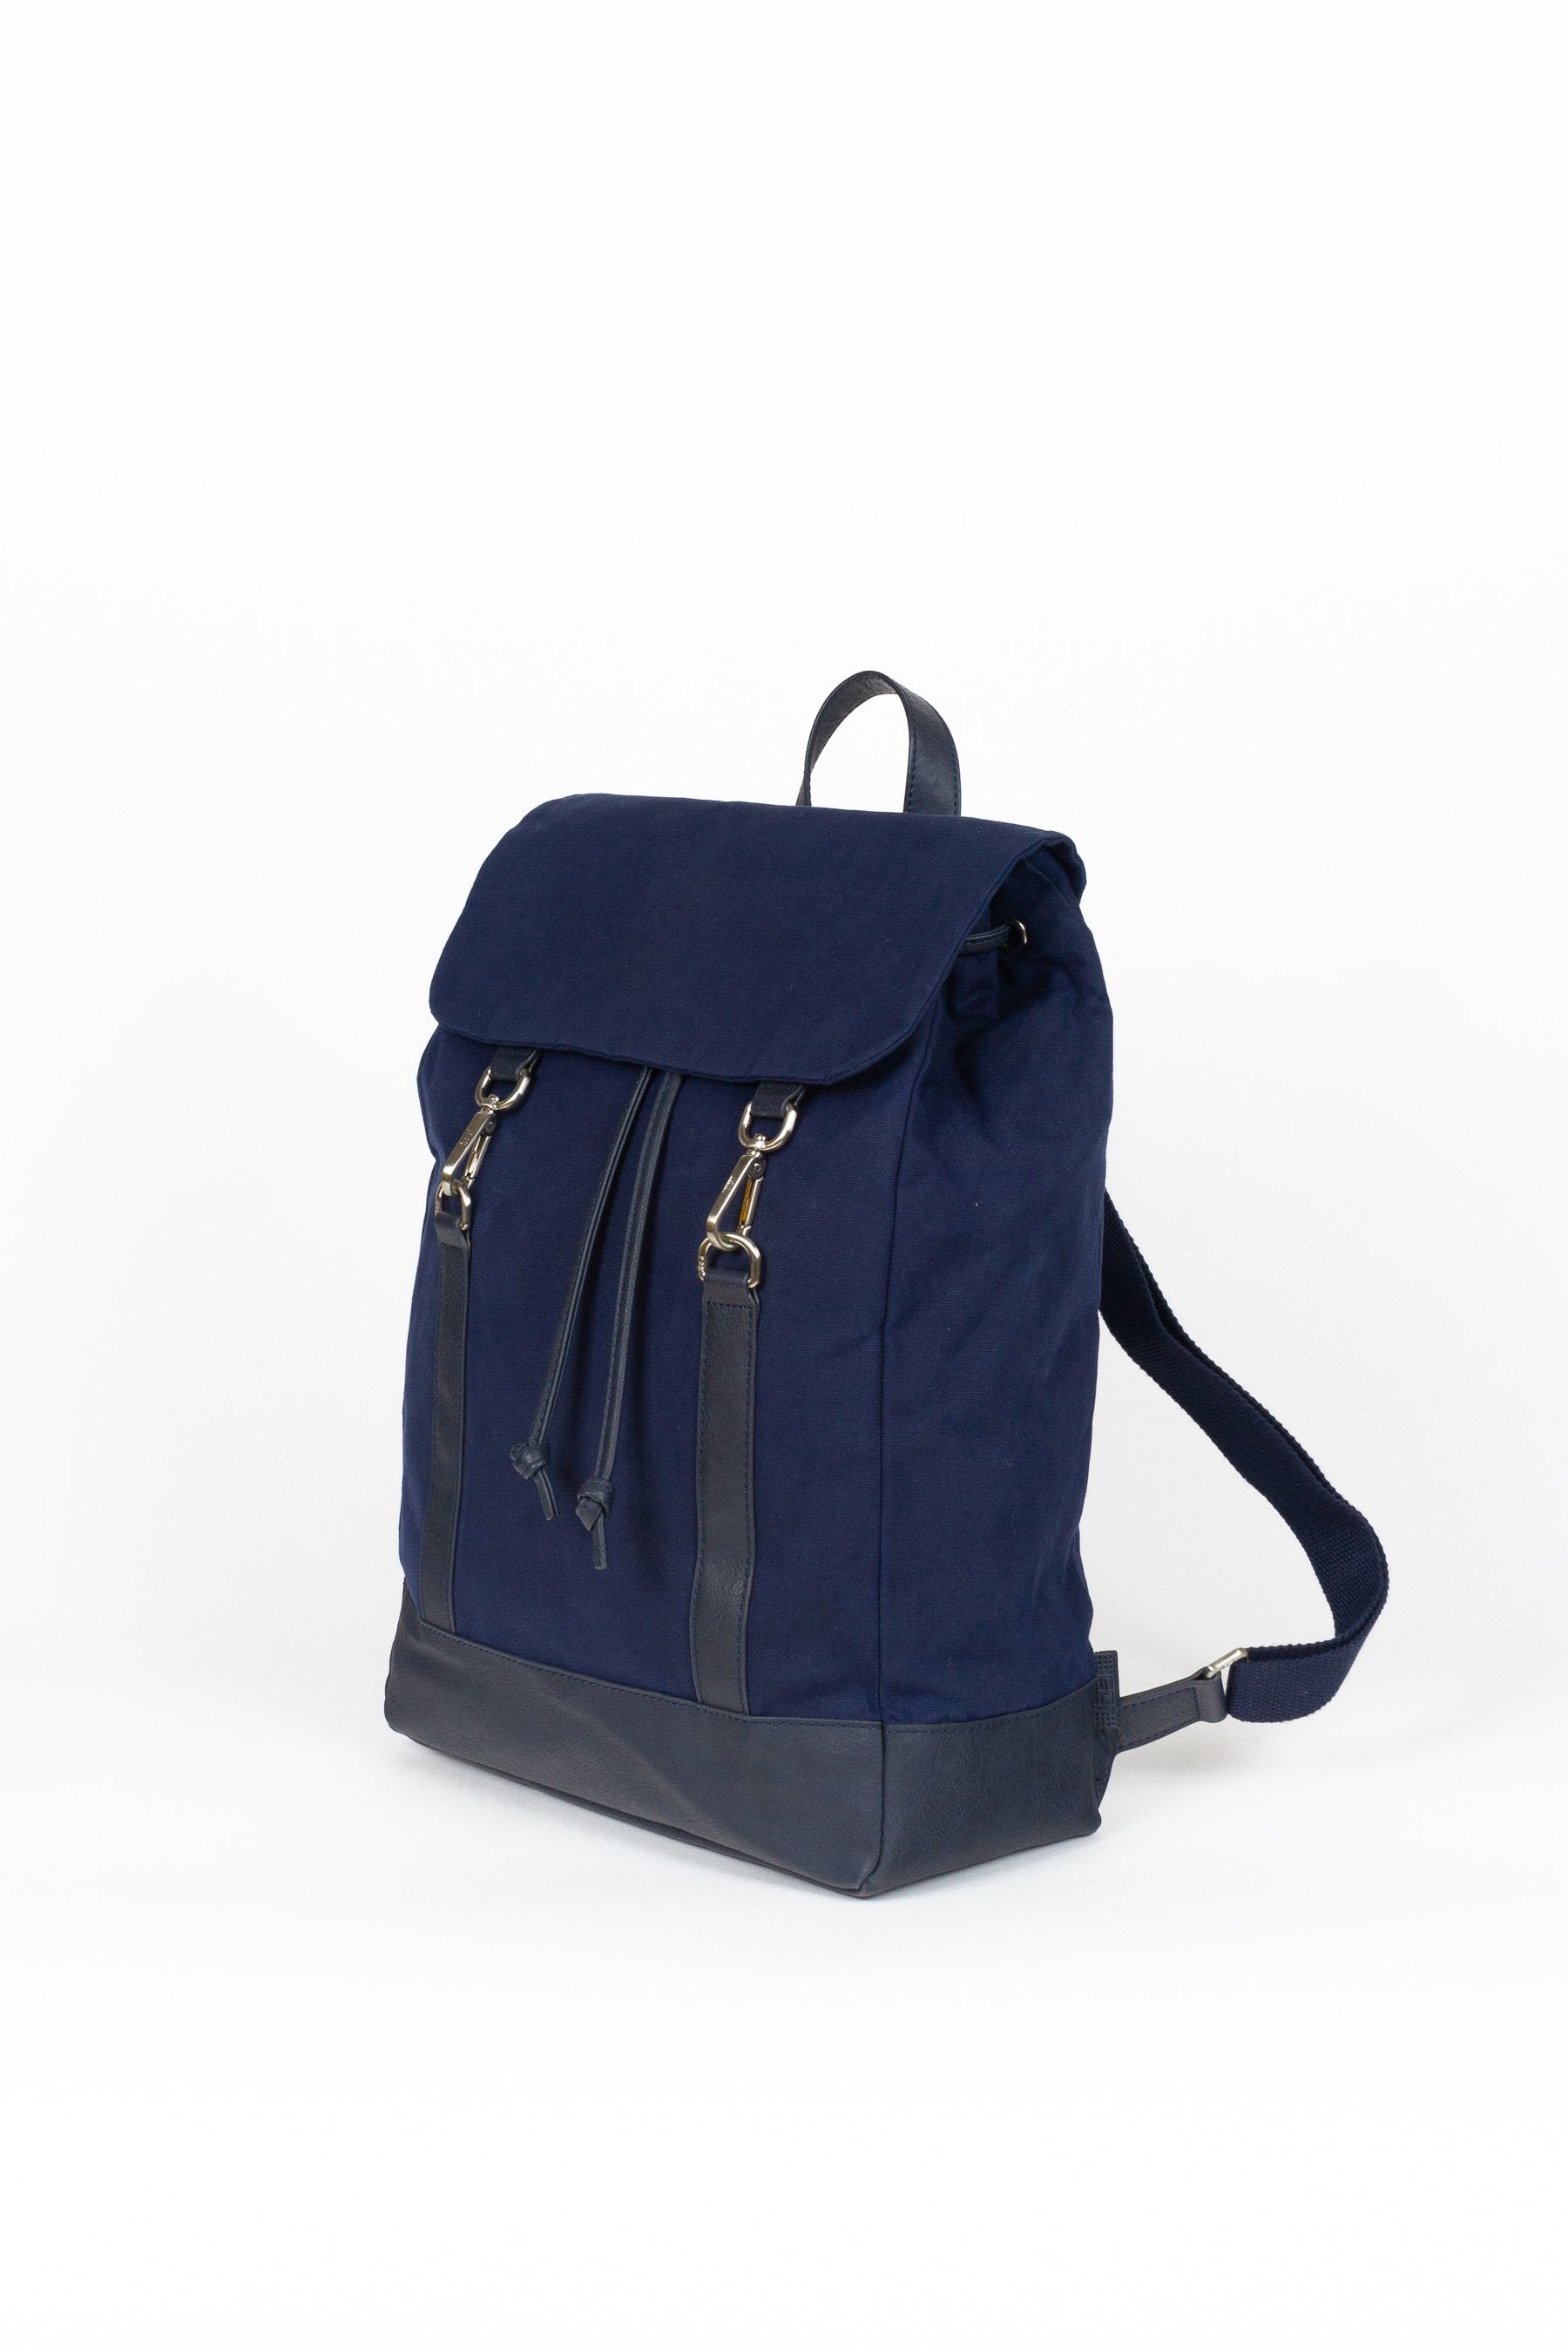 BEON.COM.AU Buy the Goteborg Drawstring Flip Top Backpack in blue by Jost Bags Jost at BEON.COM.AU